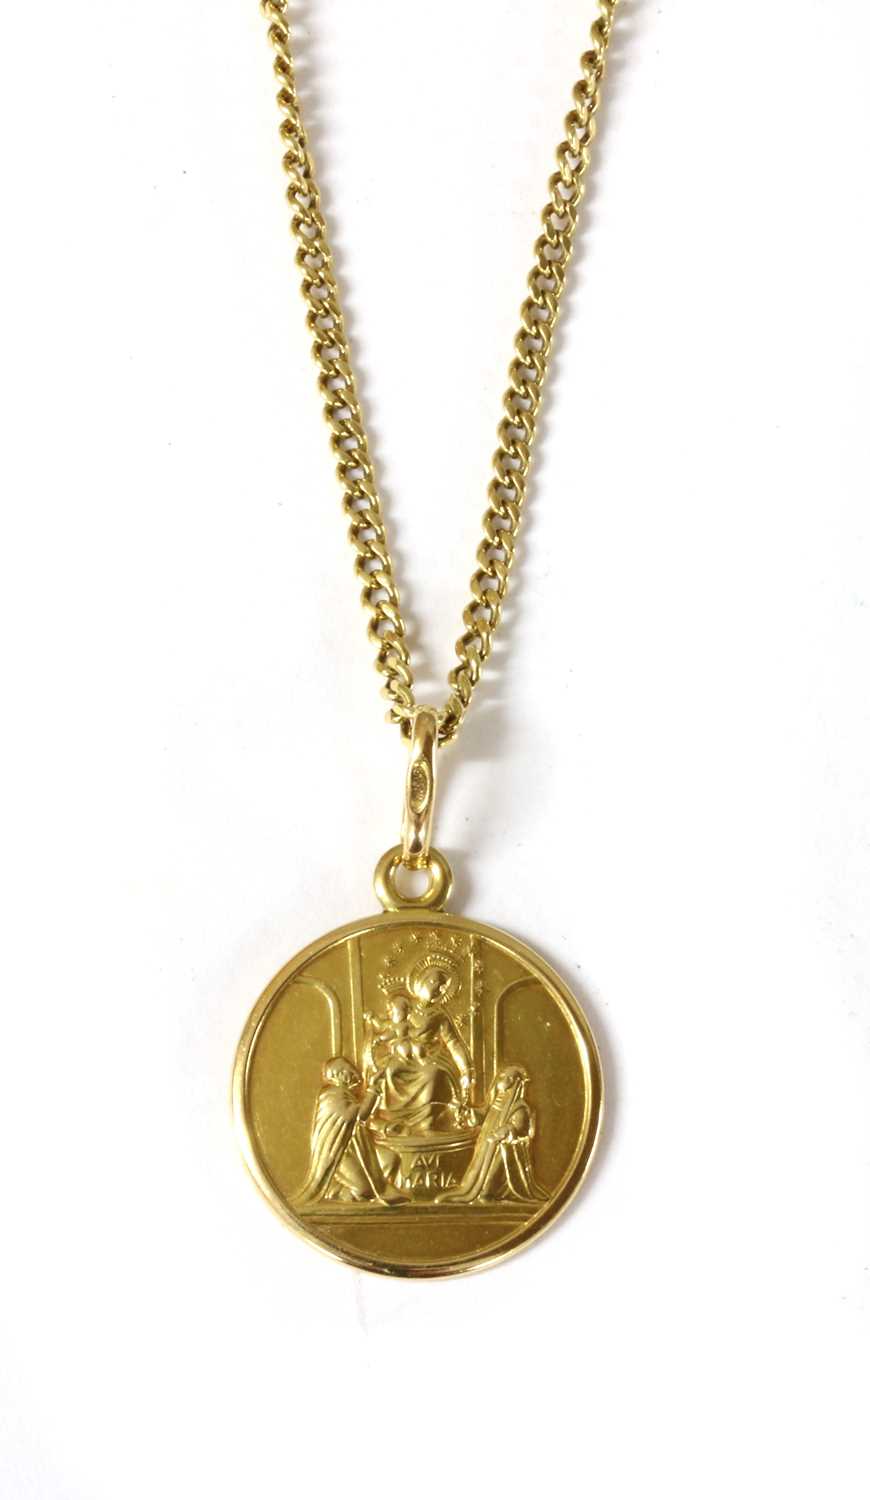 Lot 43 - An Italian 18ct gold Madonna and Child pendant, by UnoAErre